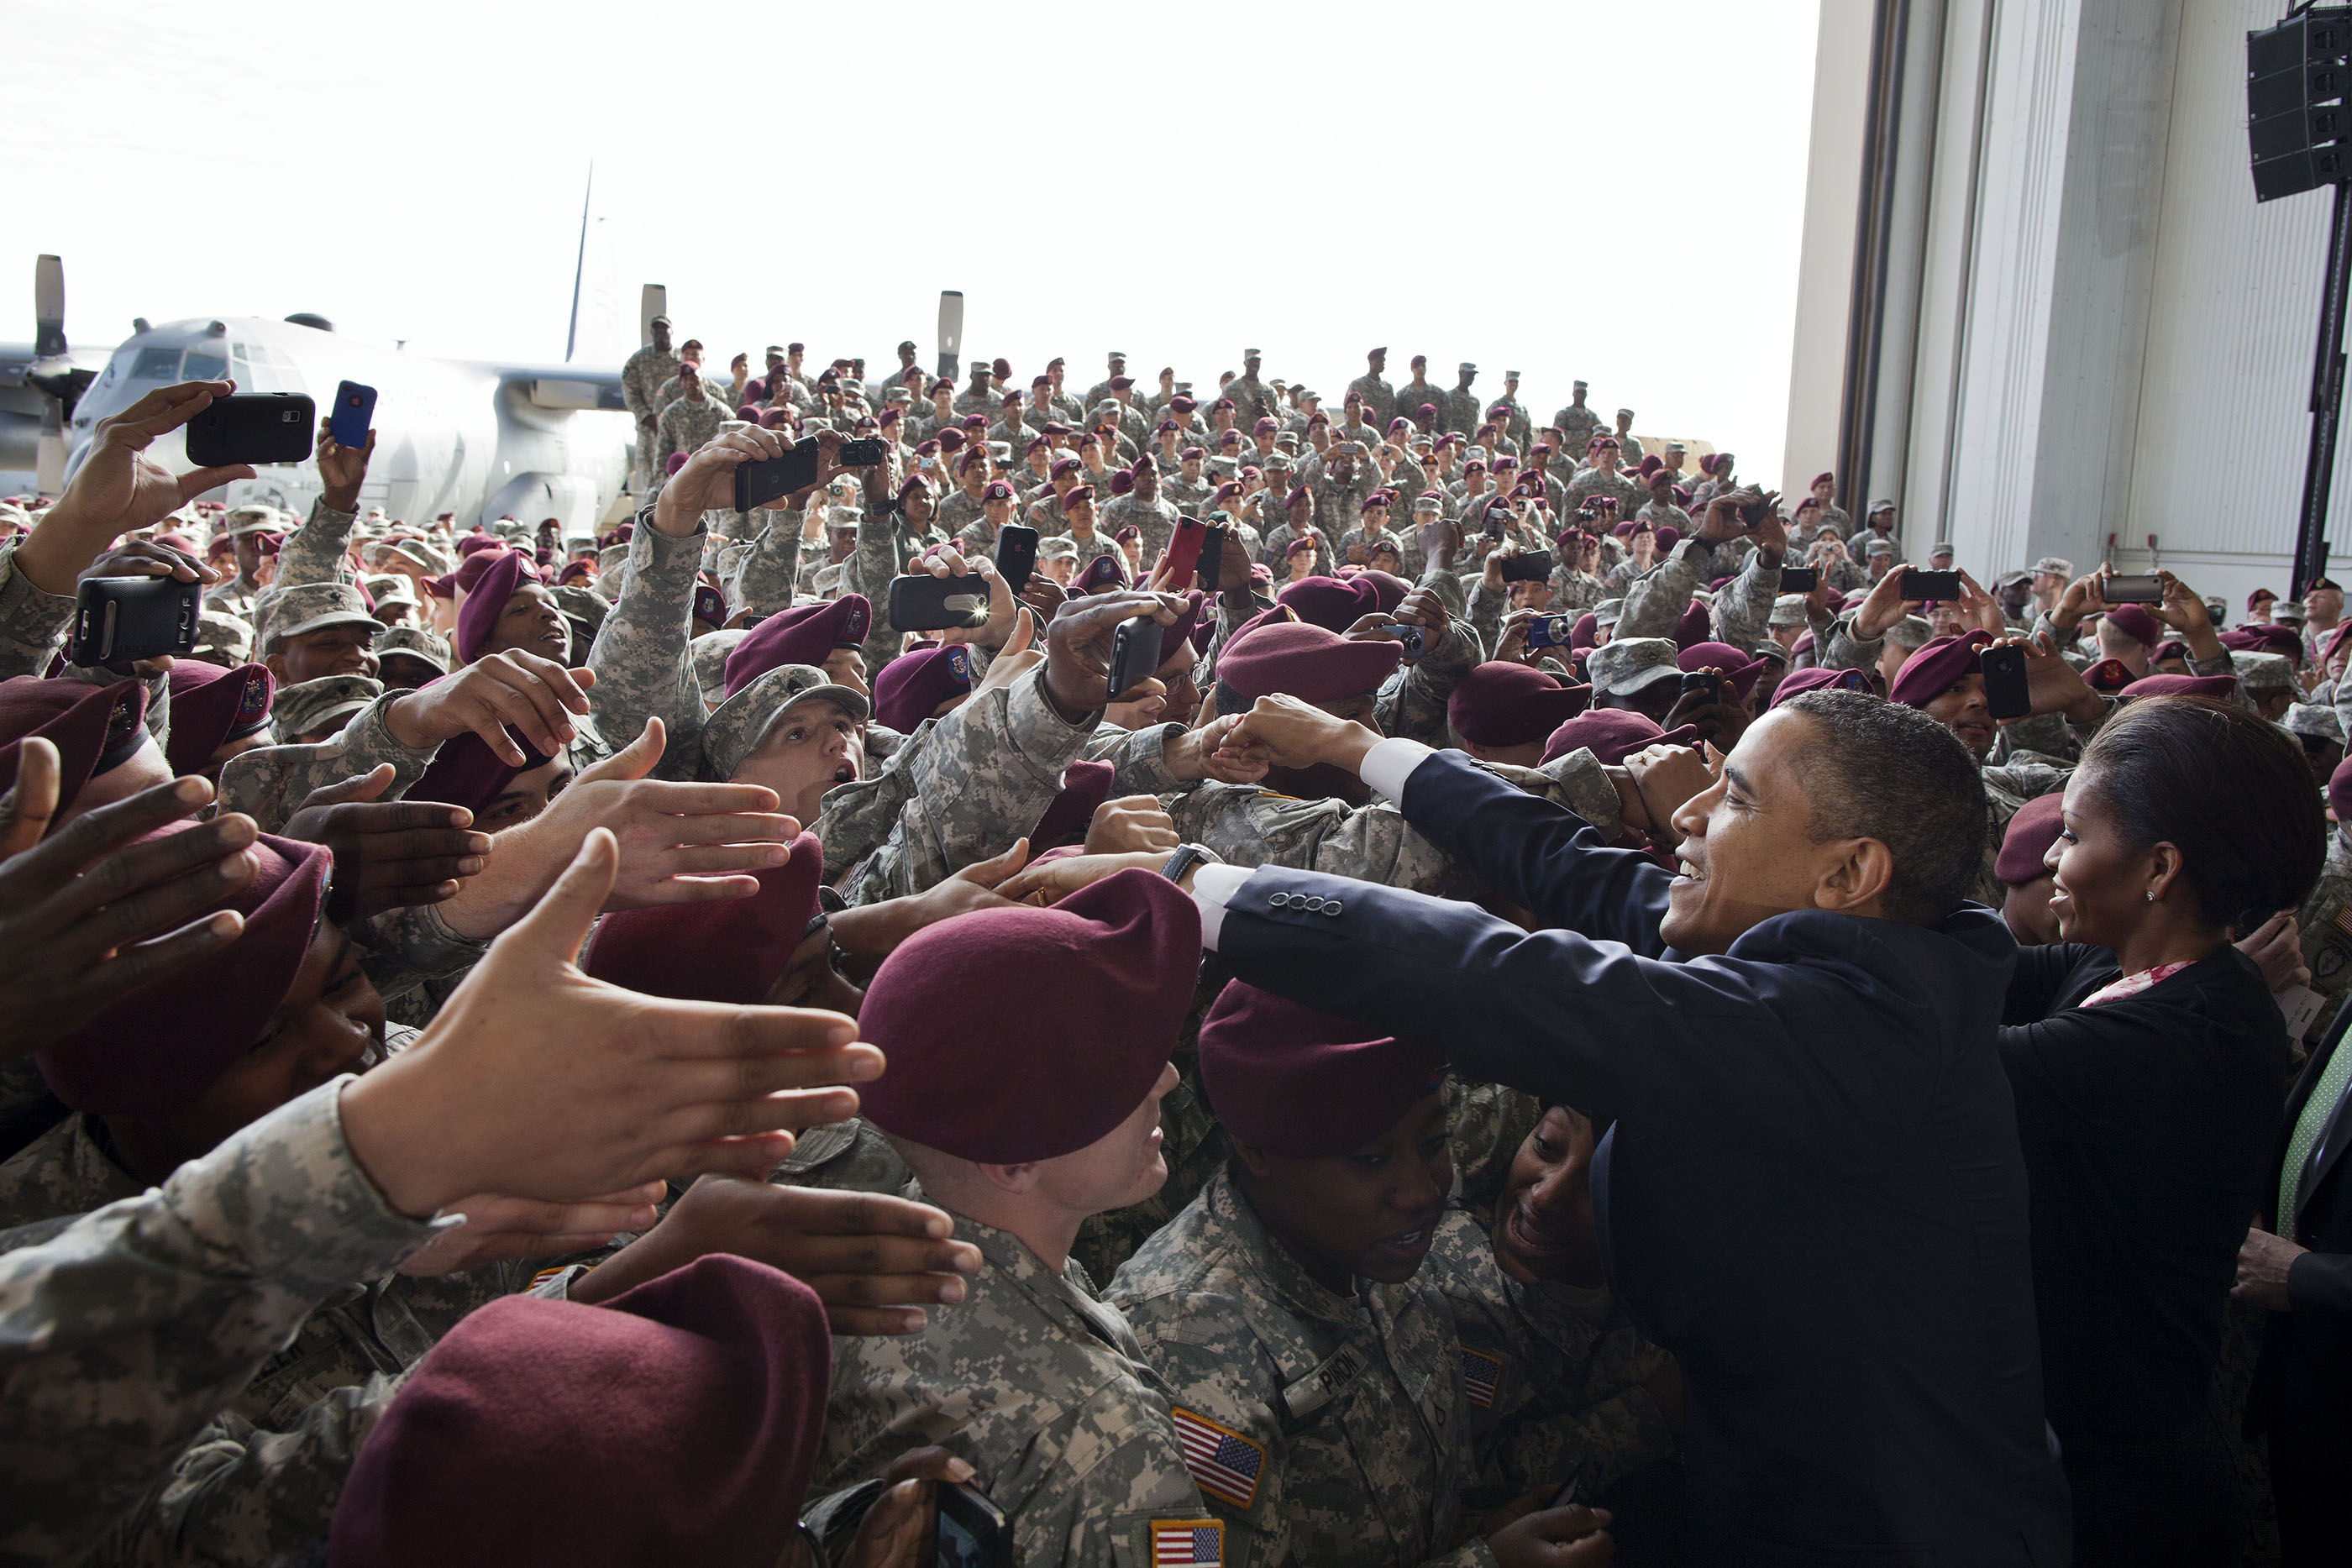 The President and First Lady greet troops at Pope Army Airfield in Fort Bragg, N.C., Dec. 14, 2011. (Official White House Photo by Pete Souza)